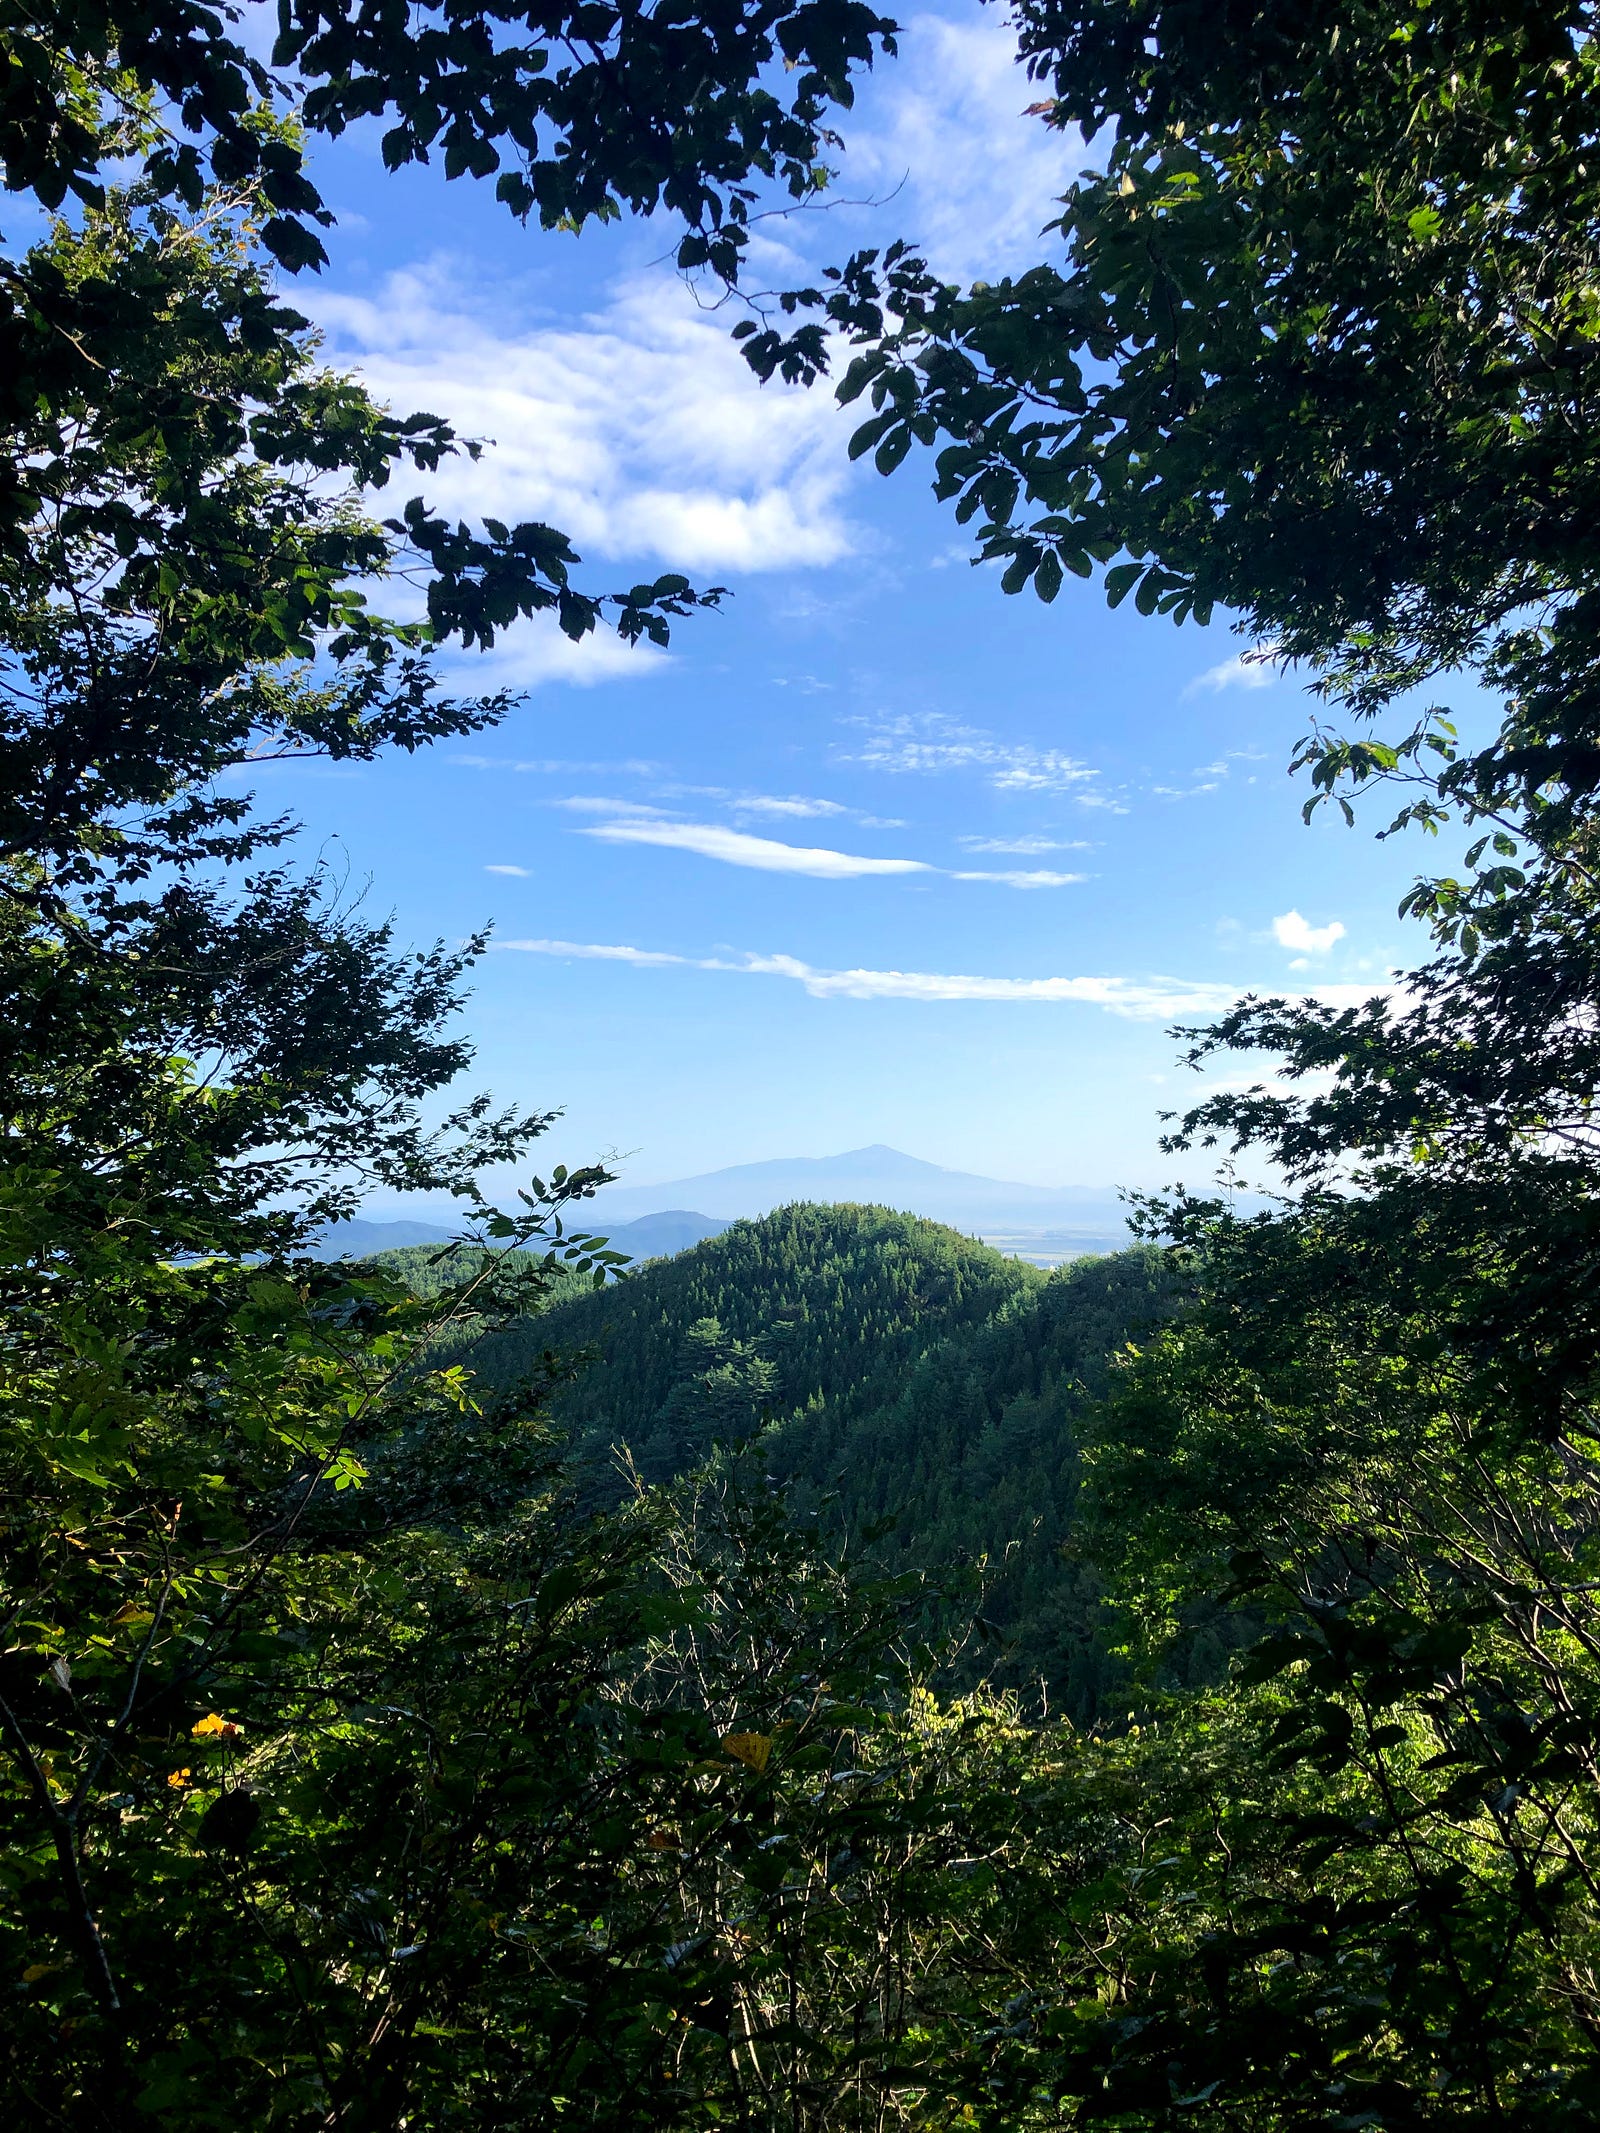 Mt. Chokai sticks out from the middle of trees that surround each side taken on Mt. Fujikura